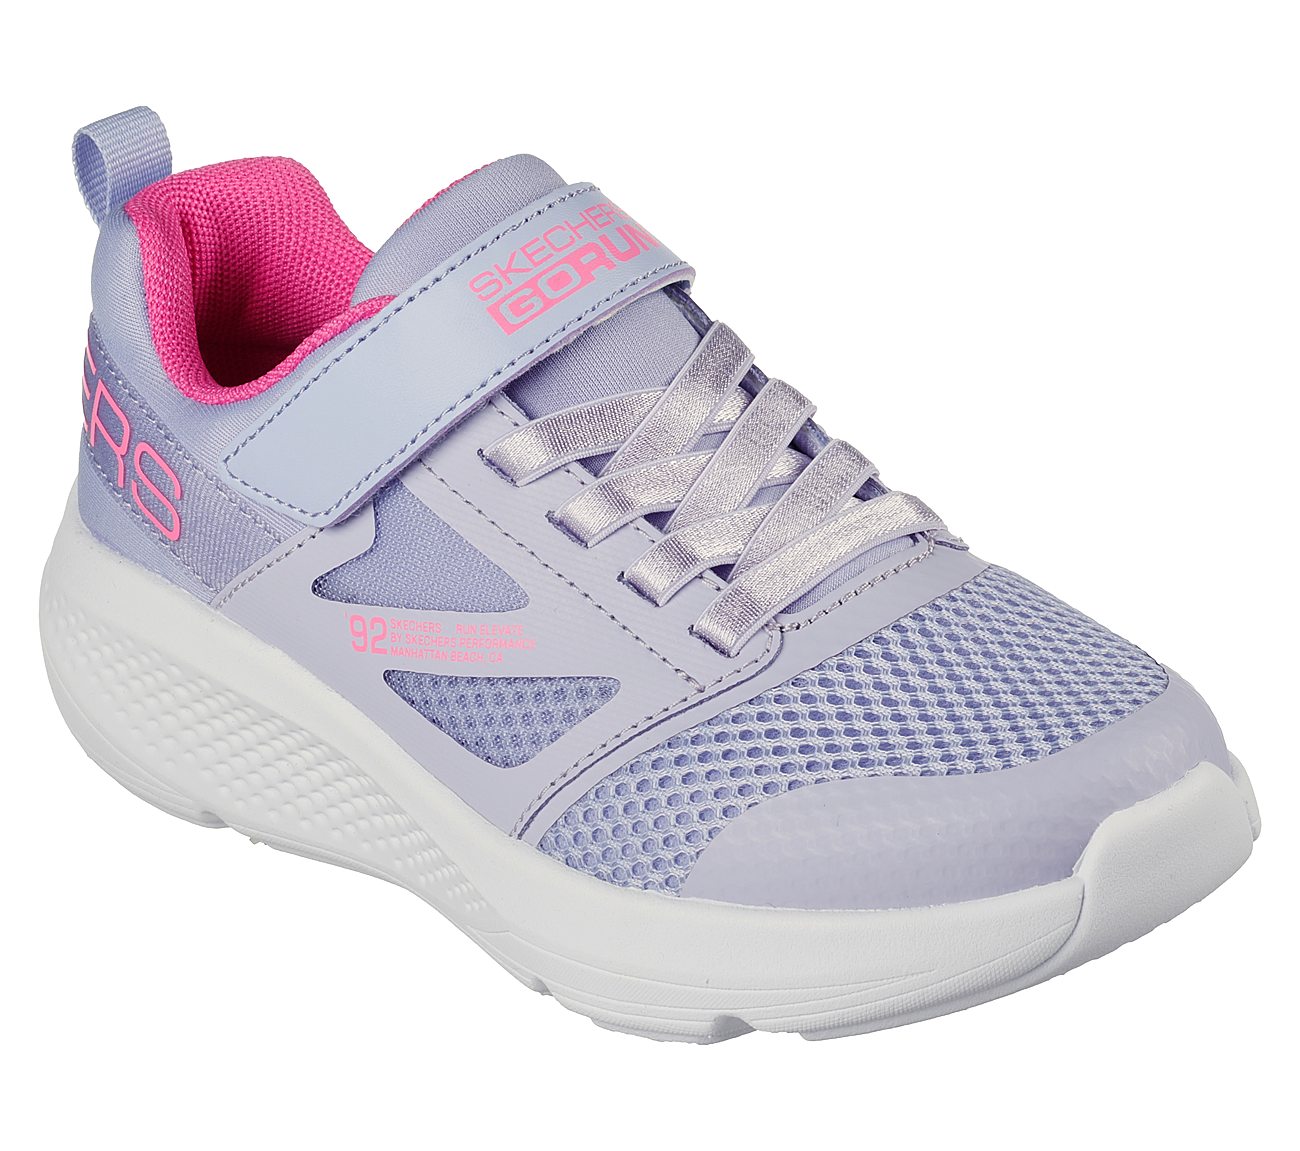 GO RUN ELEVATE - UP STEP, LAVENDER/HOT PINK Footwear Right View